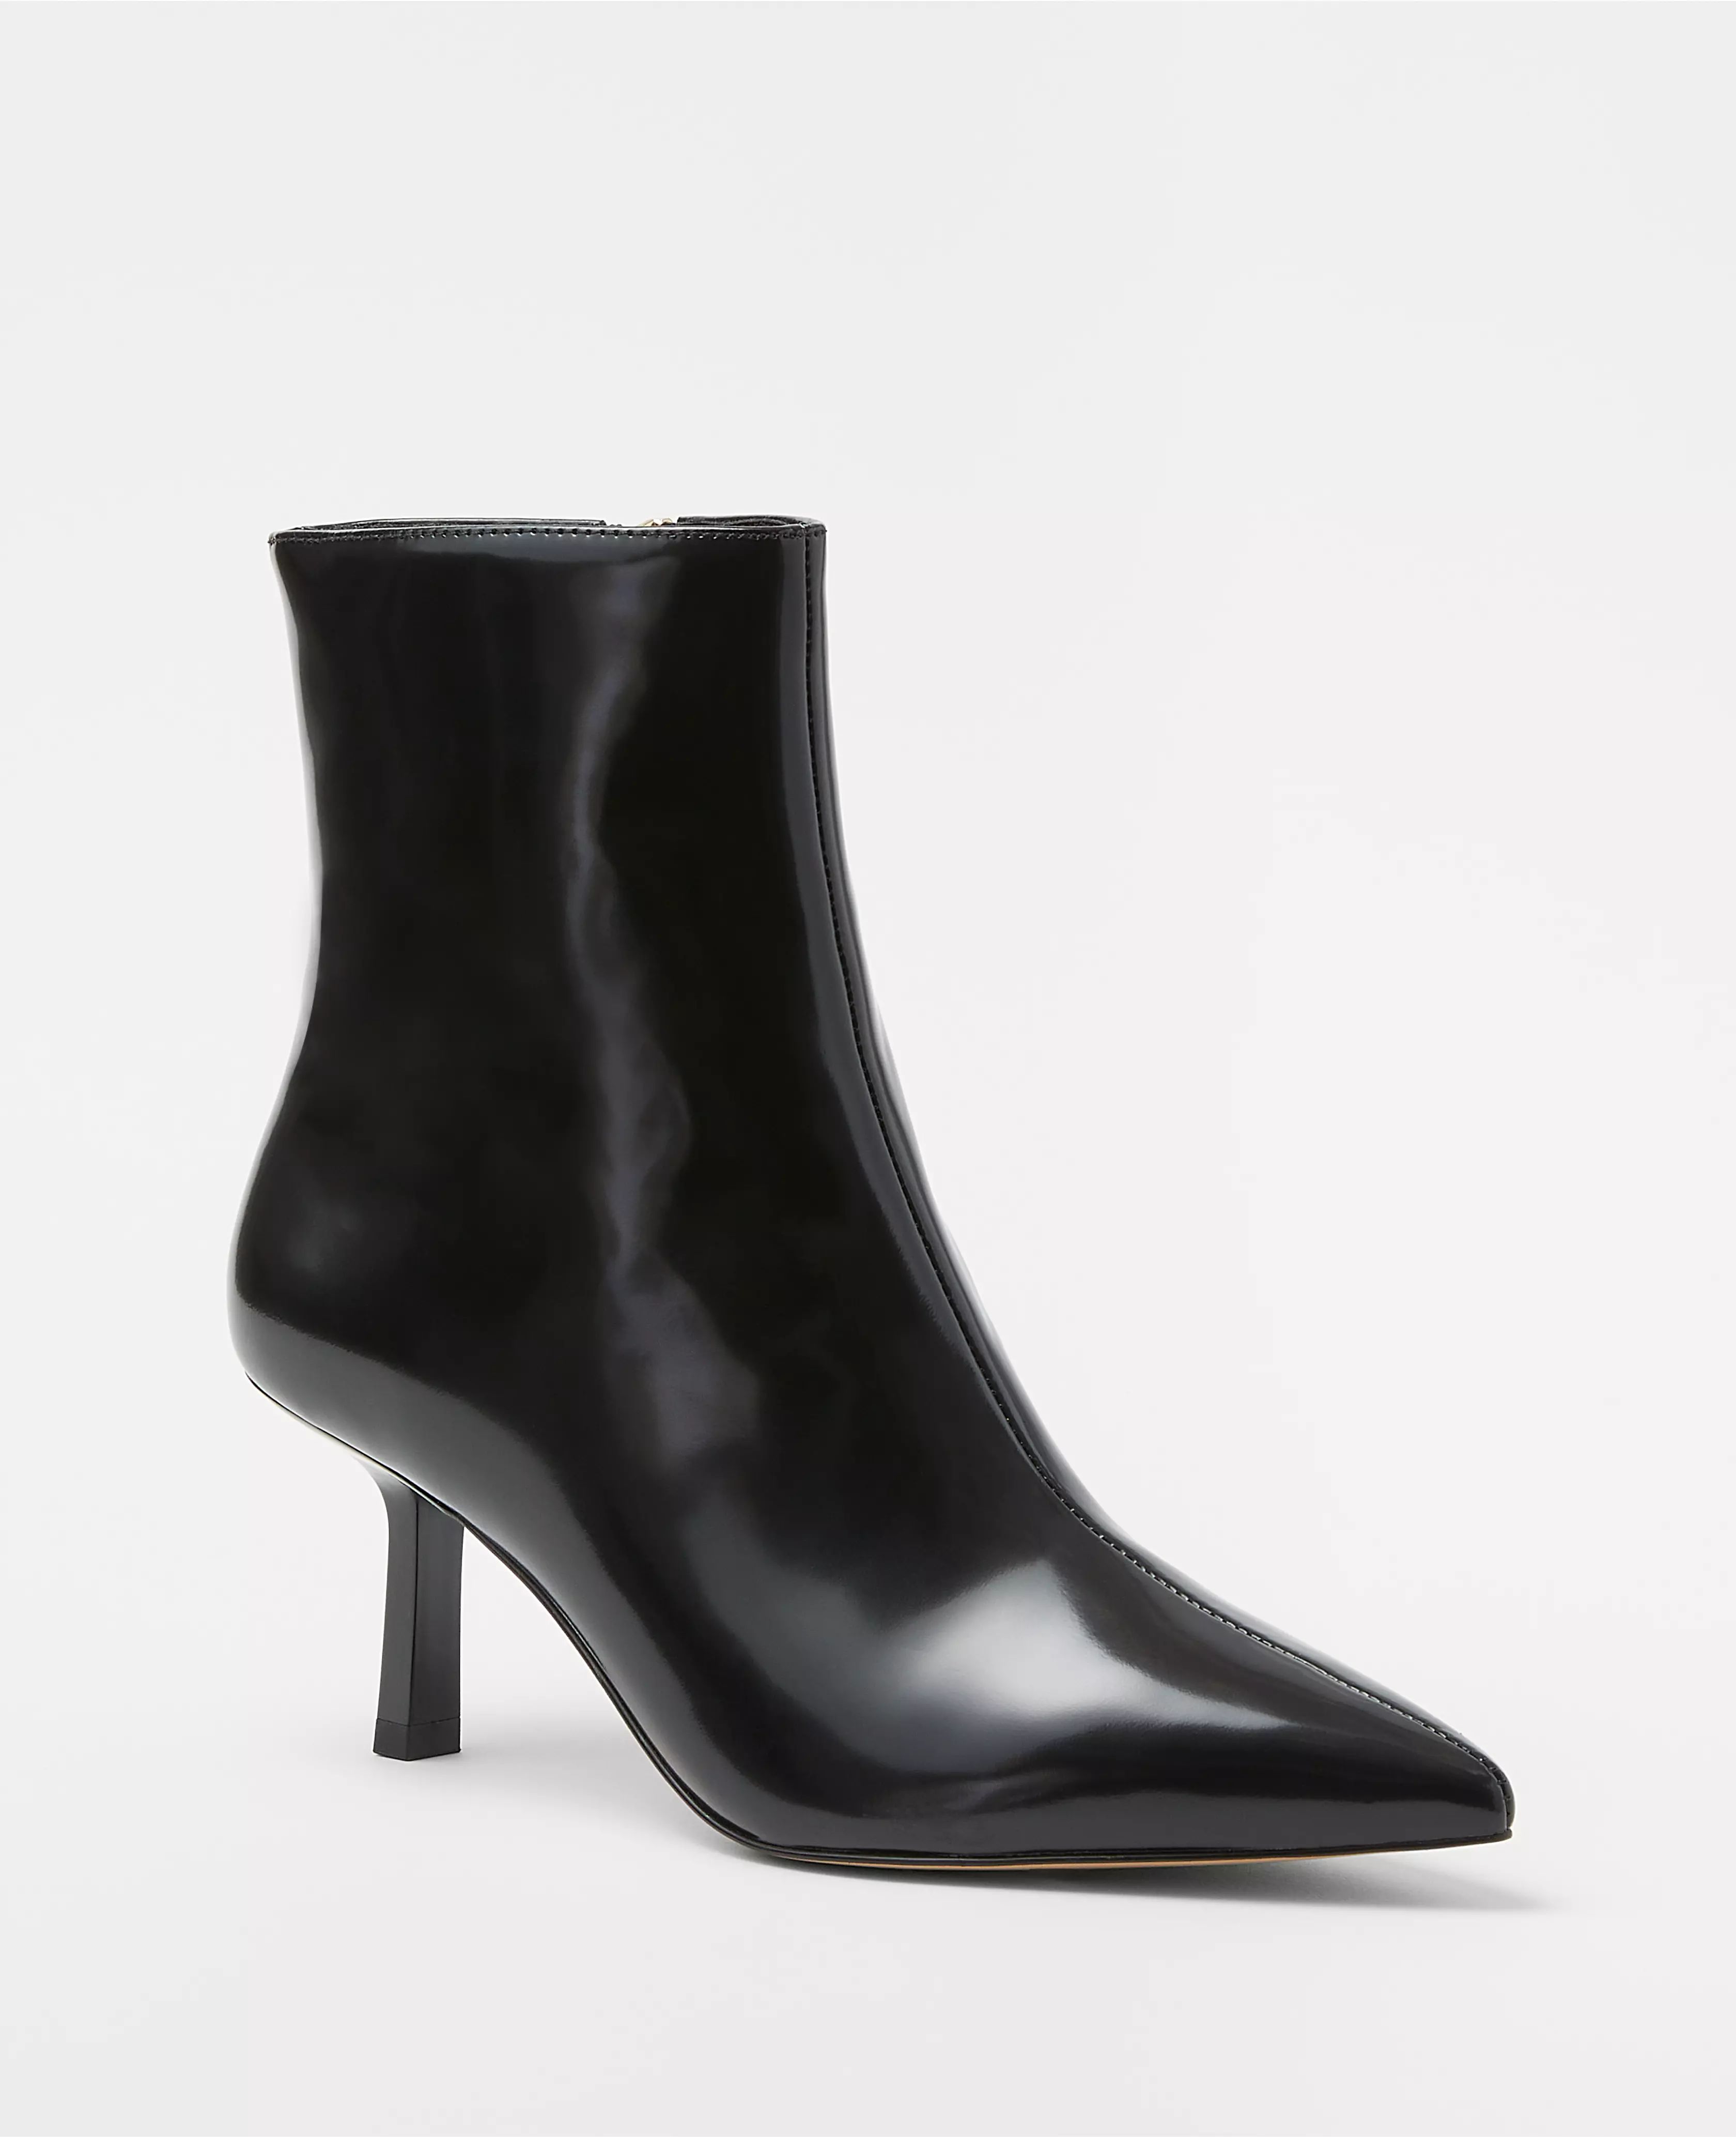 Sculptural Heel Box Leather Booties | Ann Taylor (US)